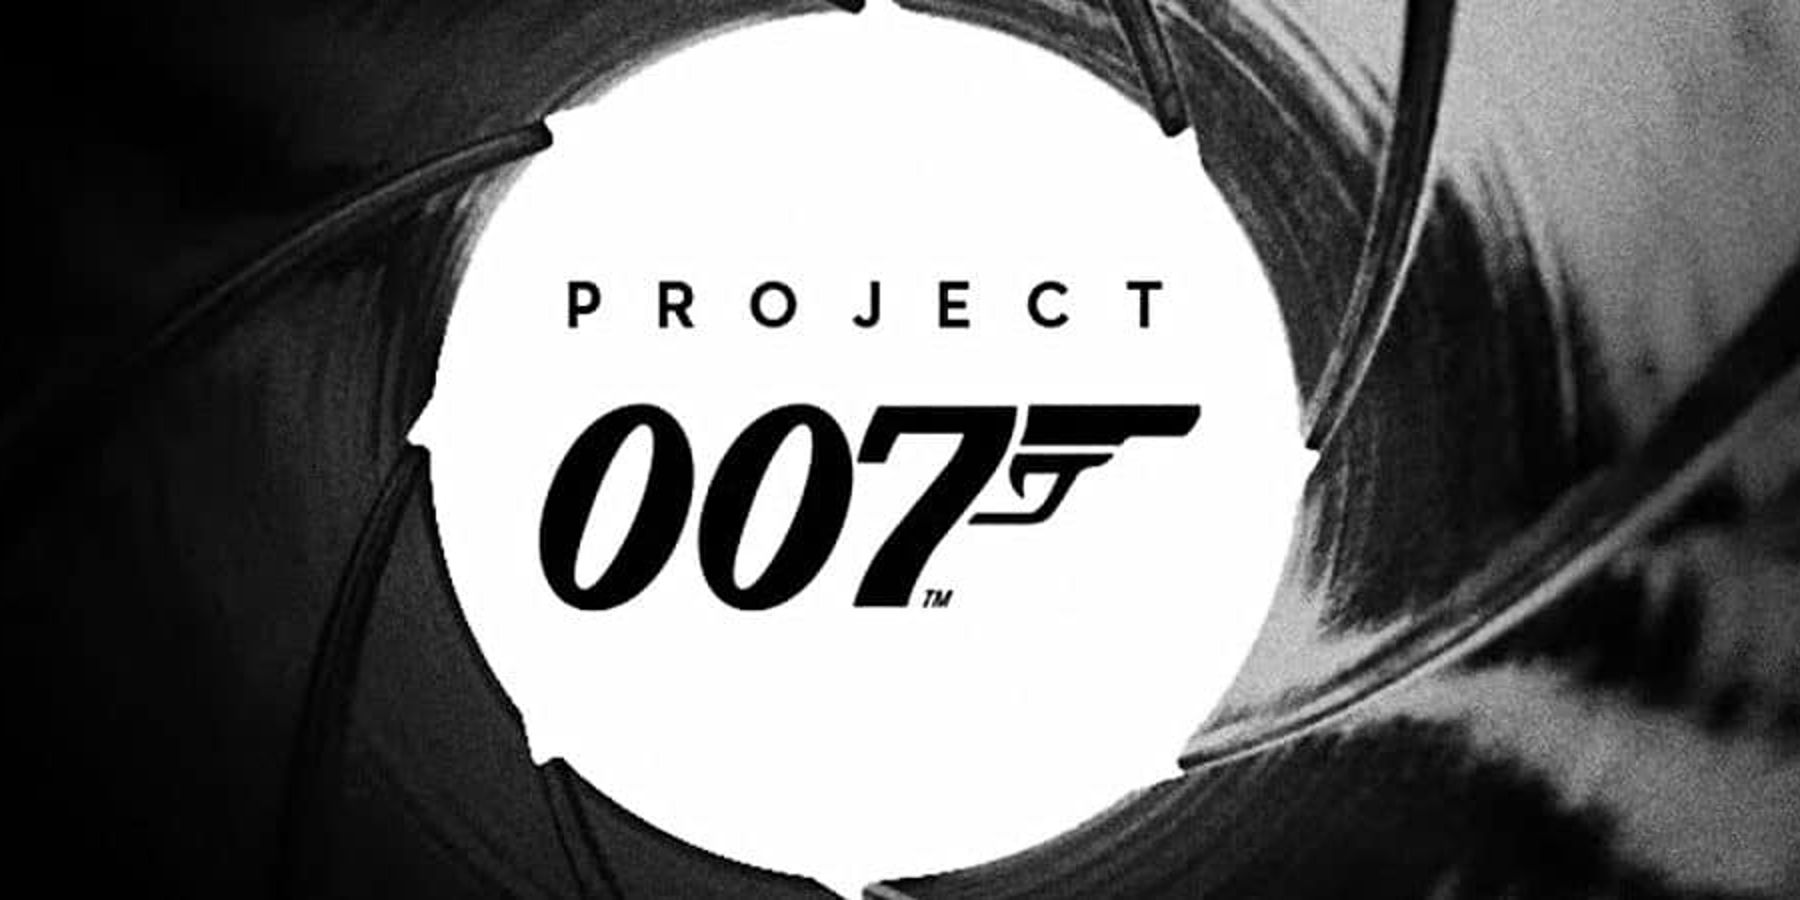 What To Expect From 'Project 007'